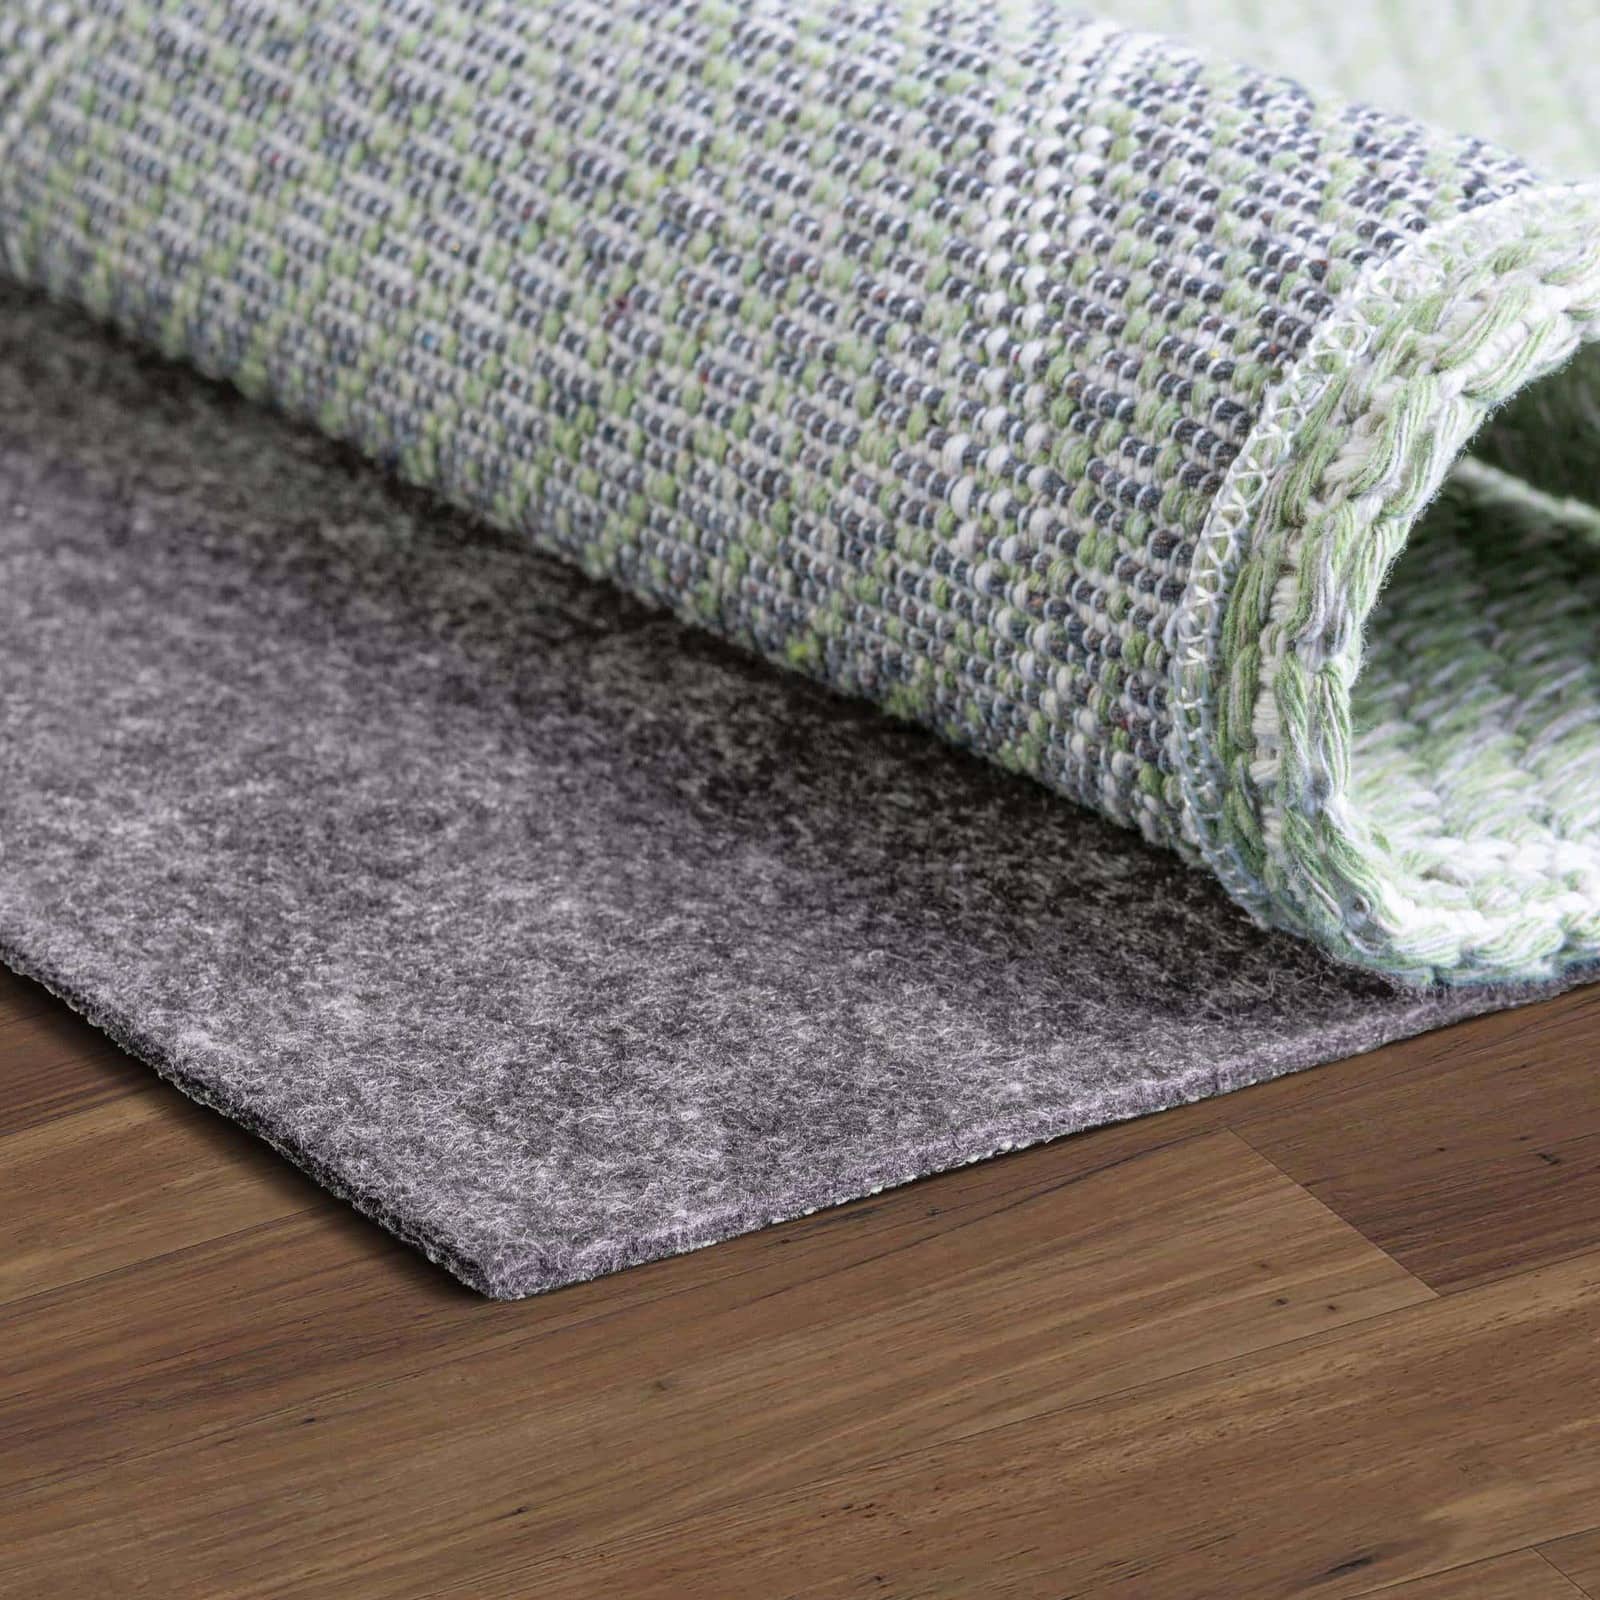 The 12 Best Rug Pads For Hardwood Floors, Natural Rug Pads For Hardwood Floors